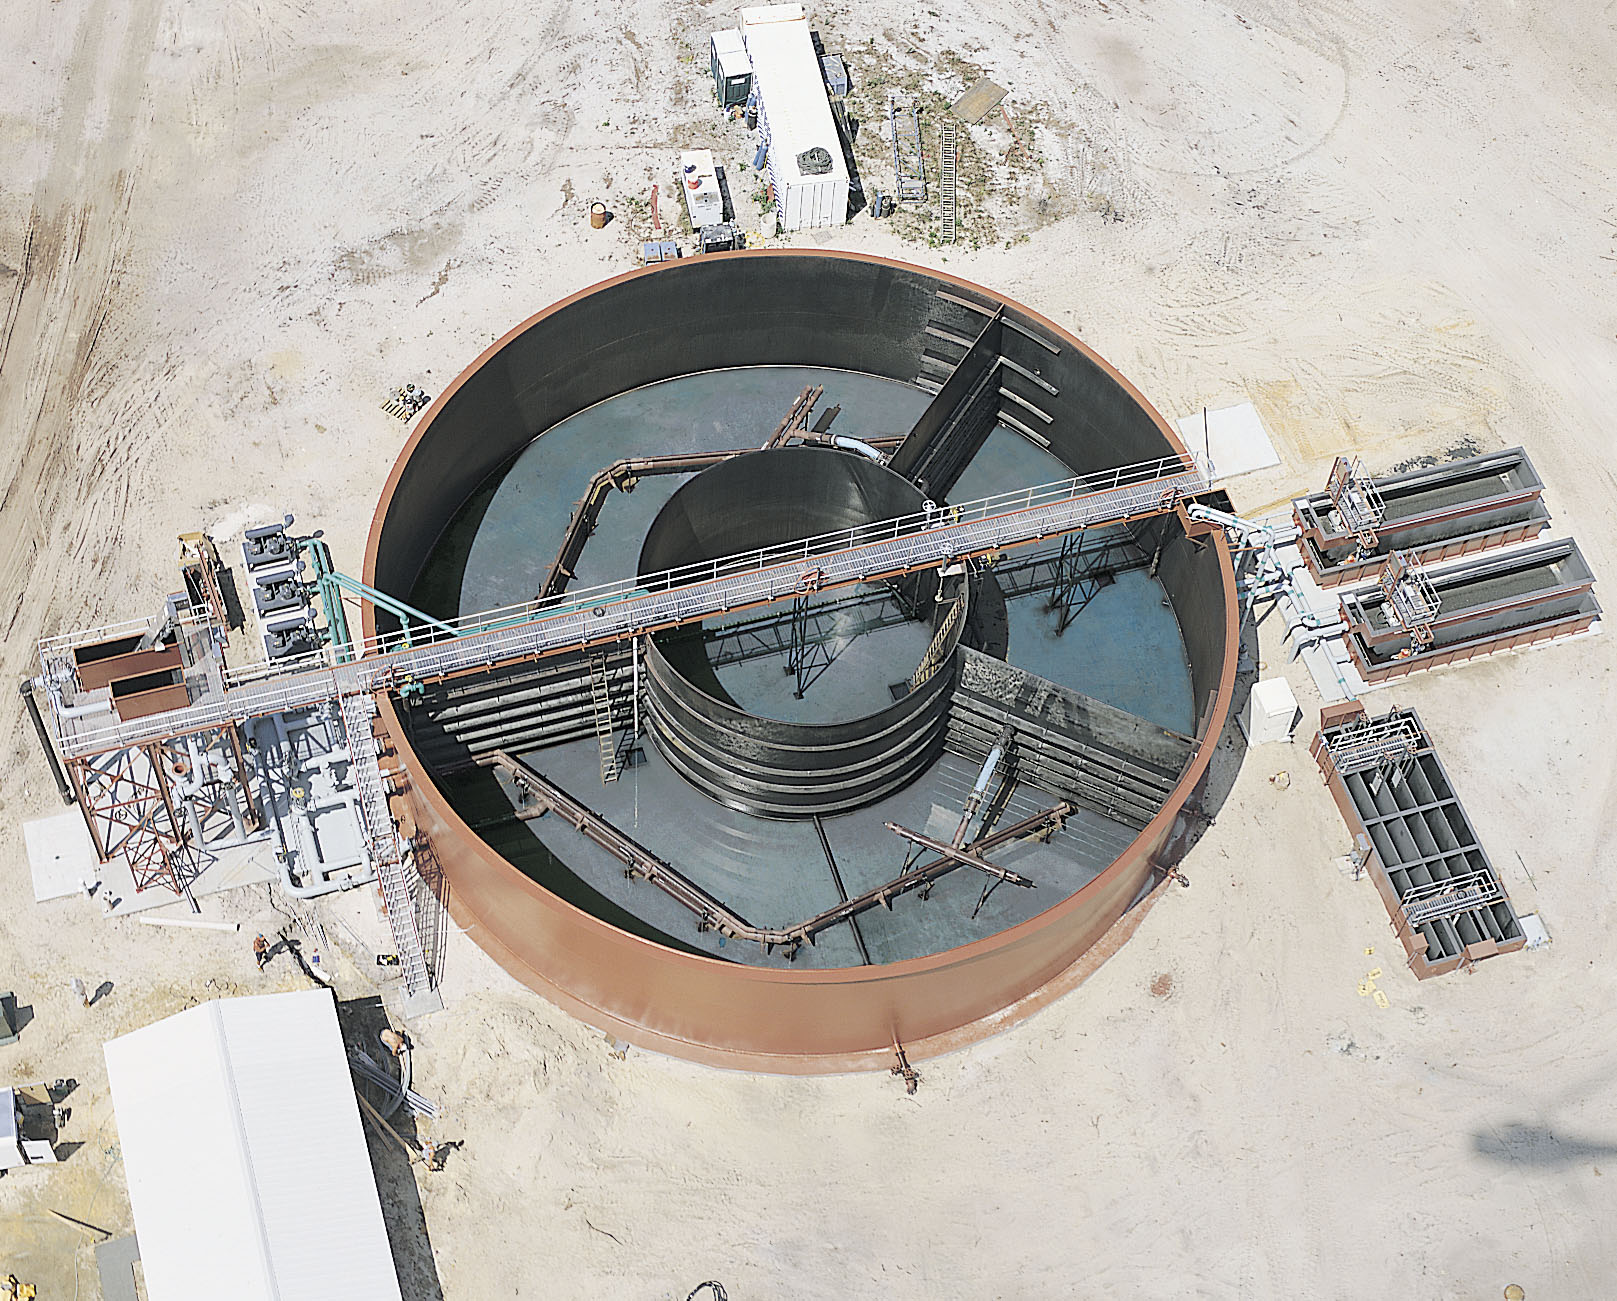  Evoqua to provide wastewater treatment plant for Texan city 